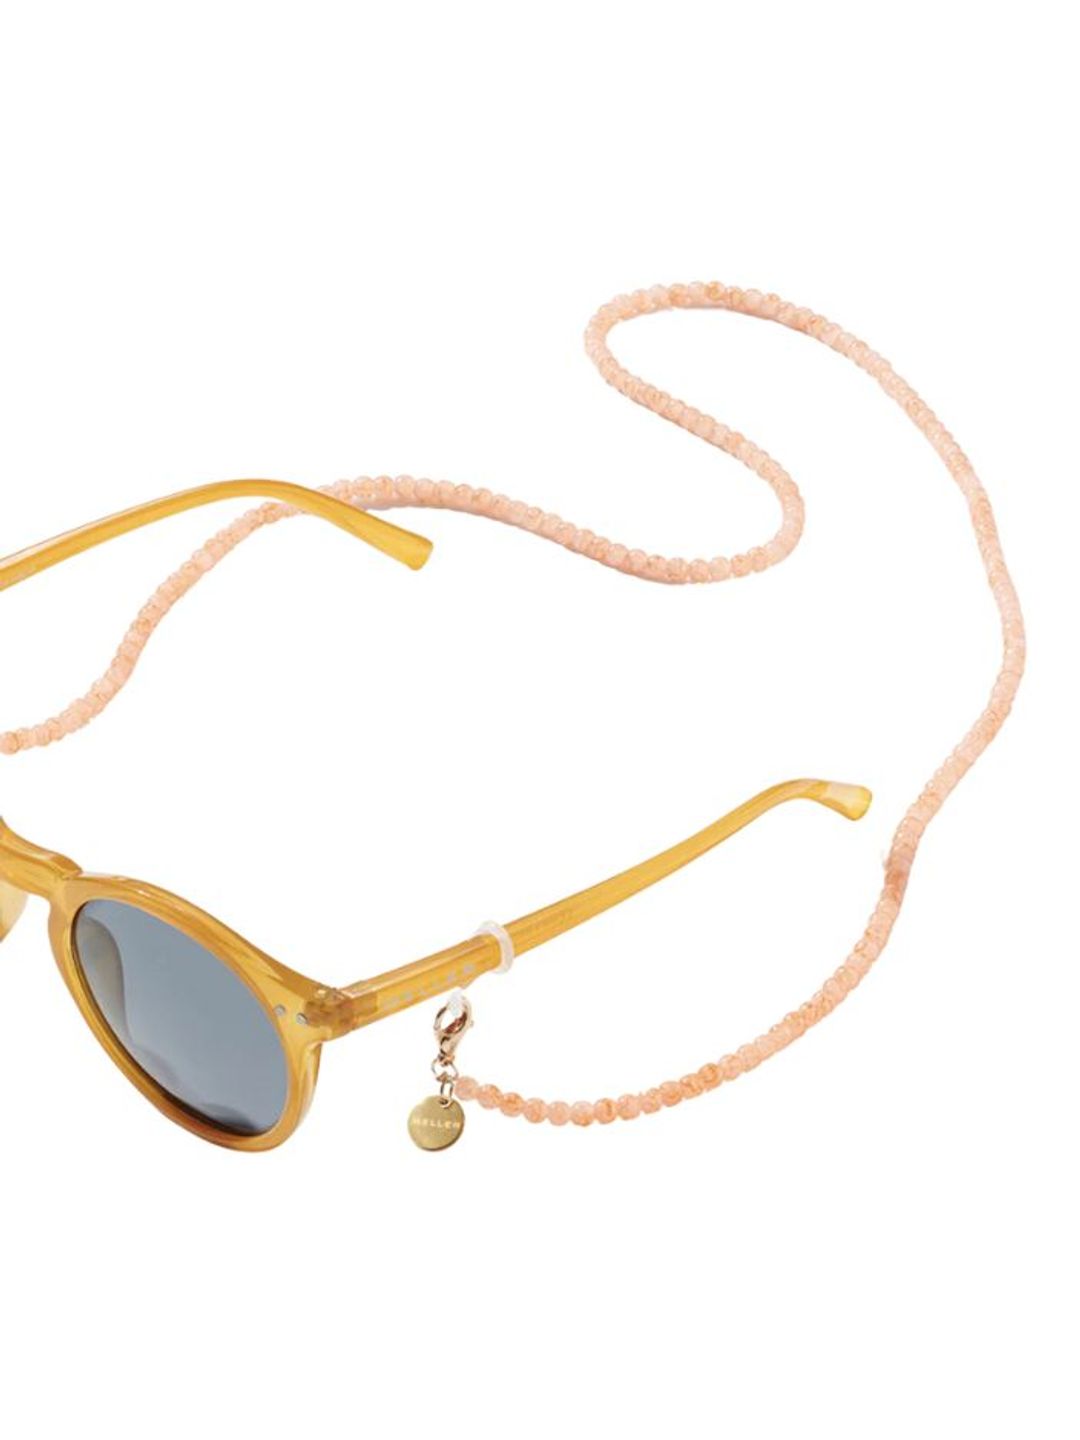 Yellow sunglasses with pink chain